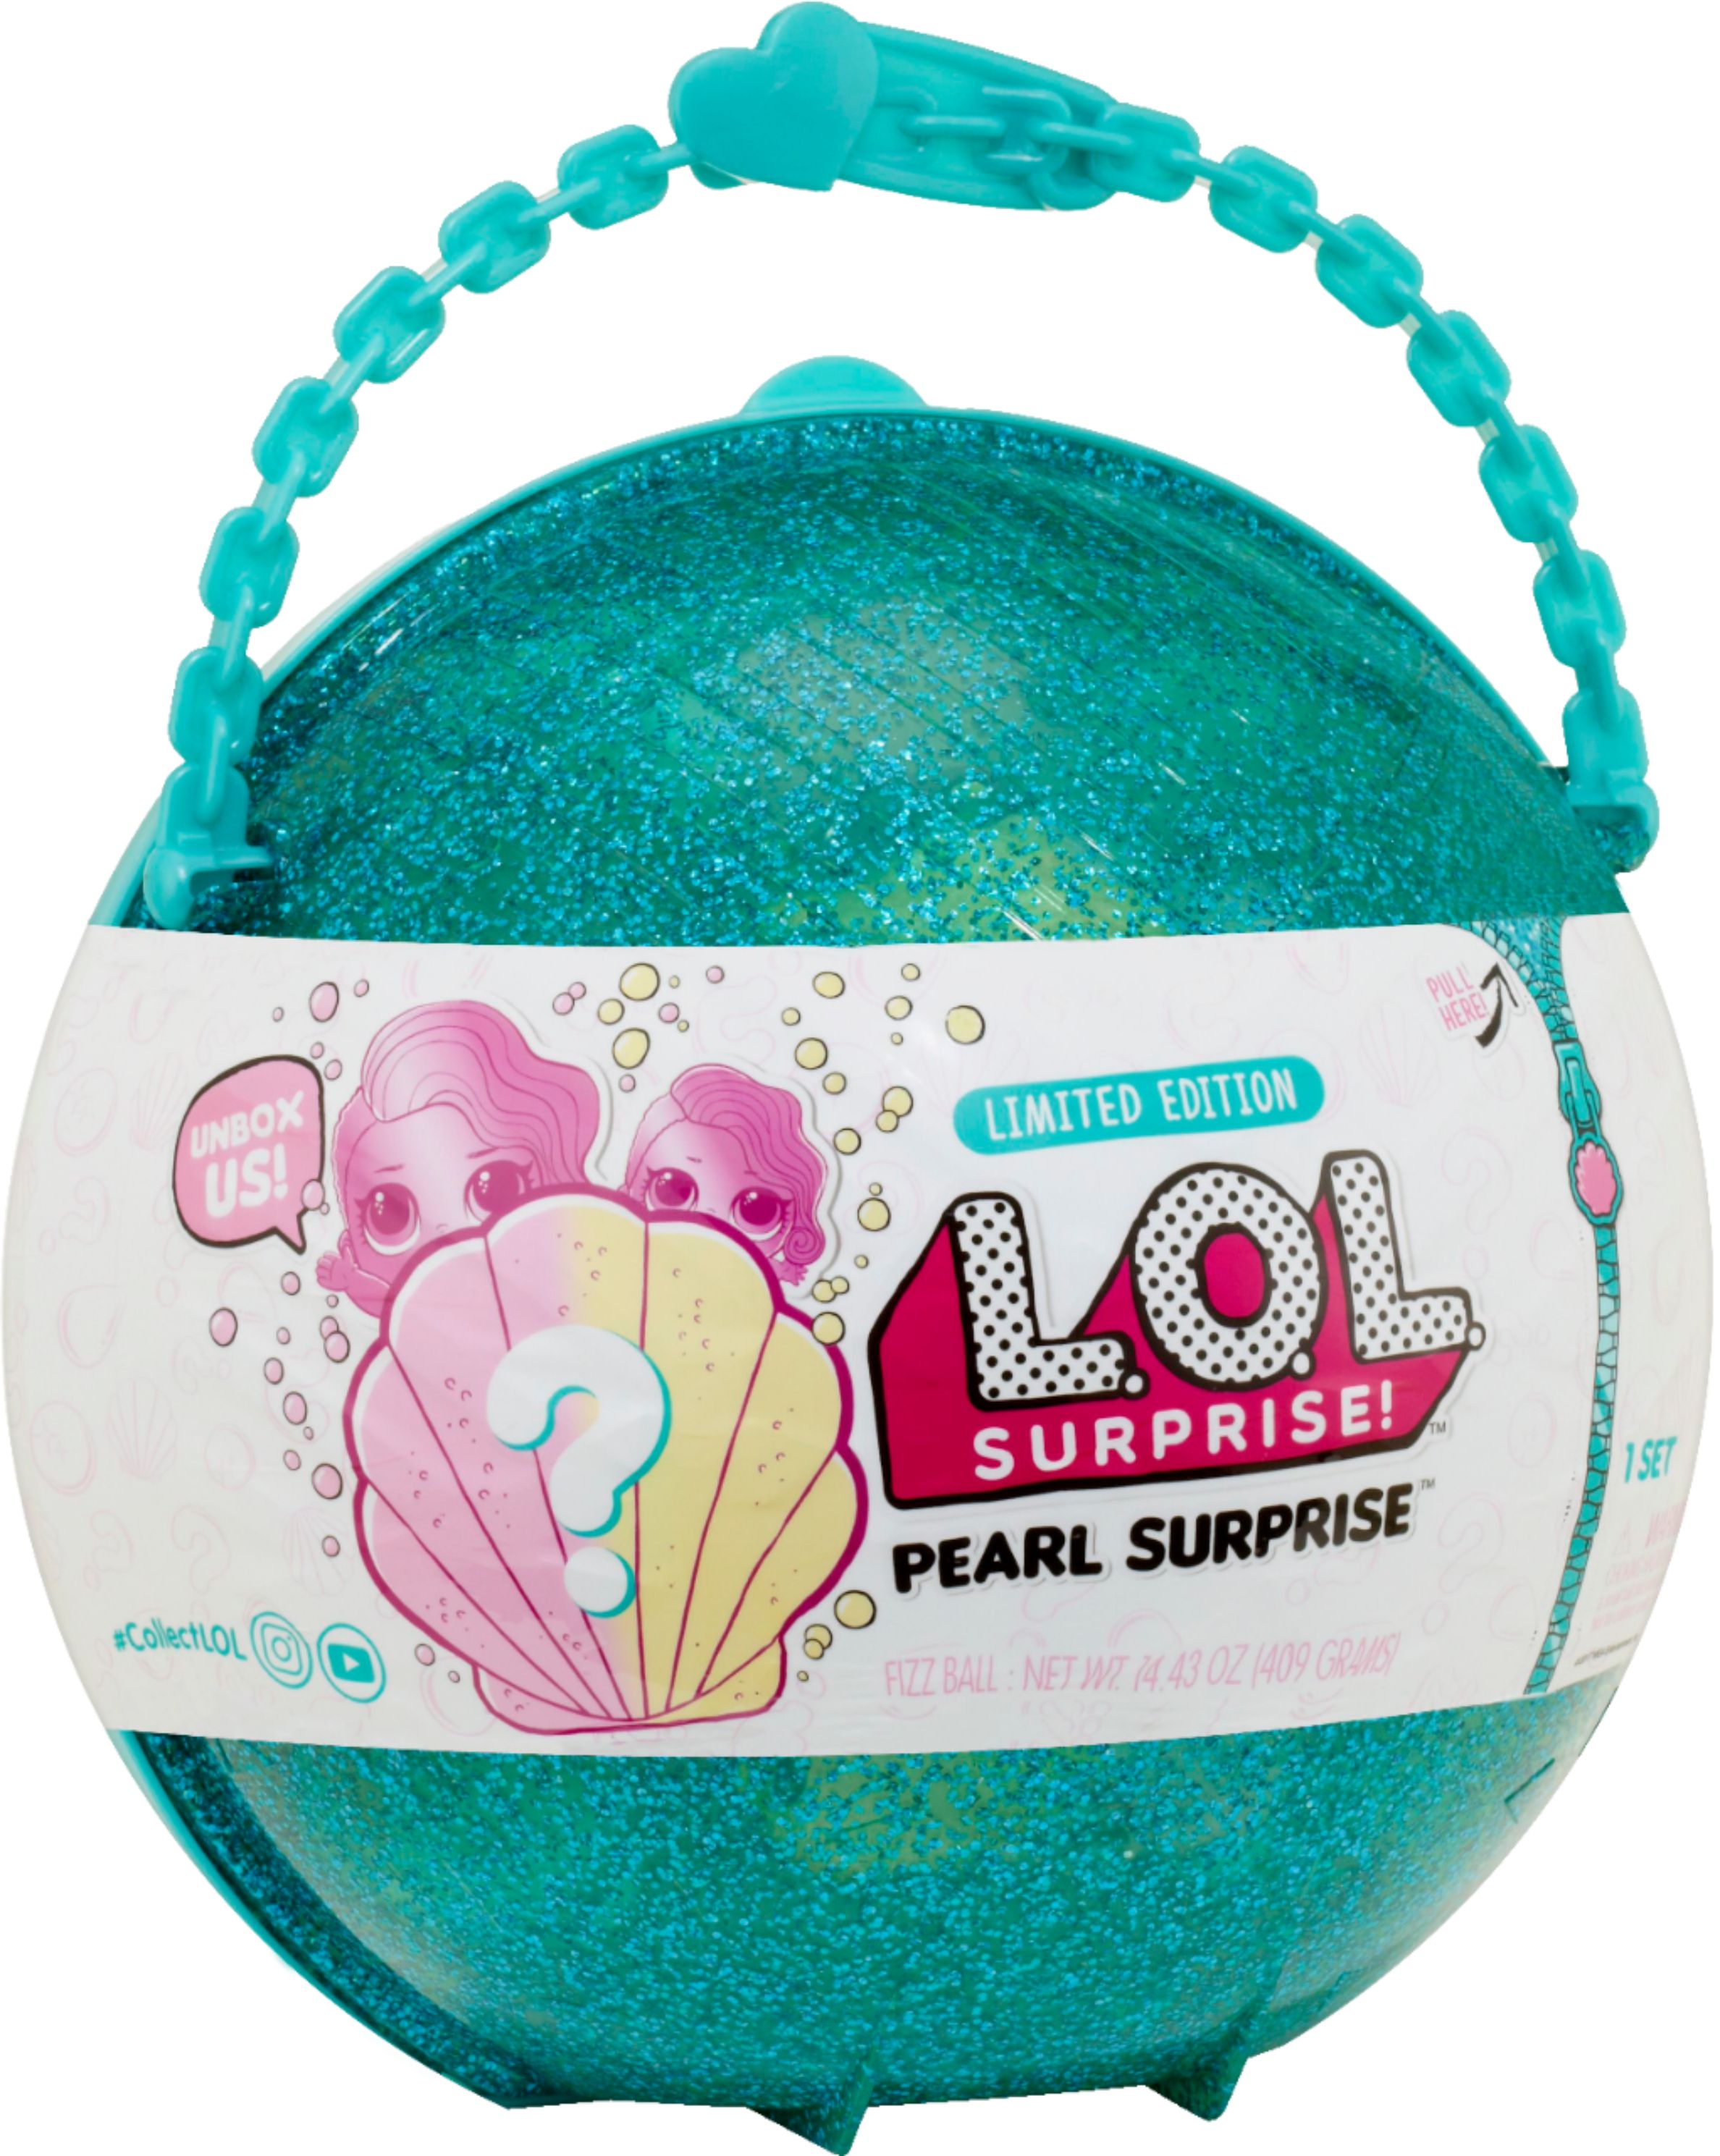 LOL Pearl Surprise Teal 2018 Limited Edition New Release Mermaid L.O.L Doll Big 